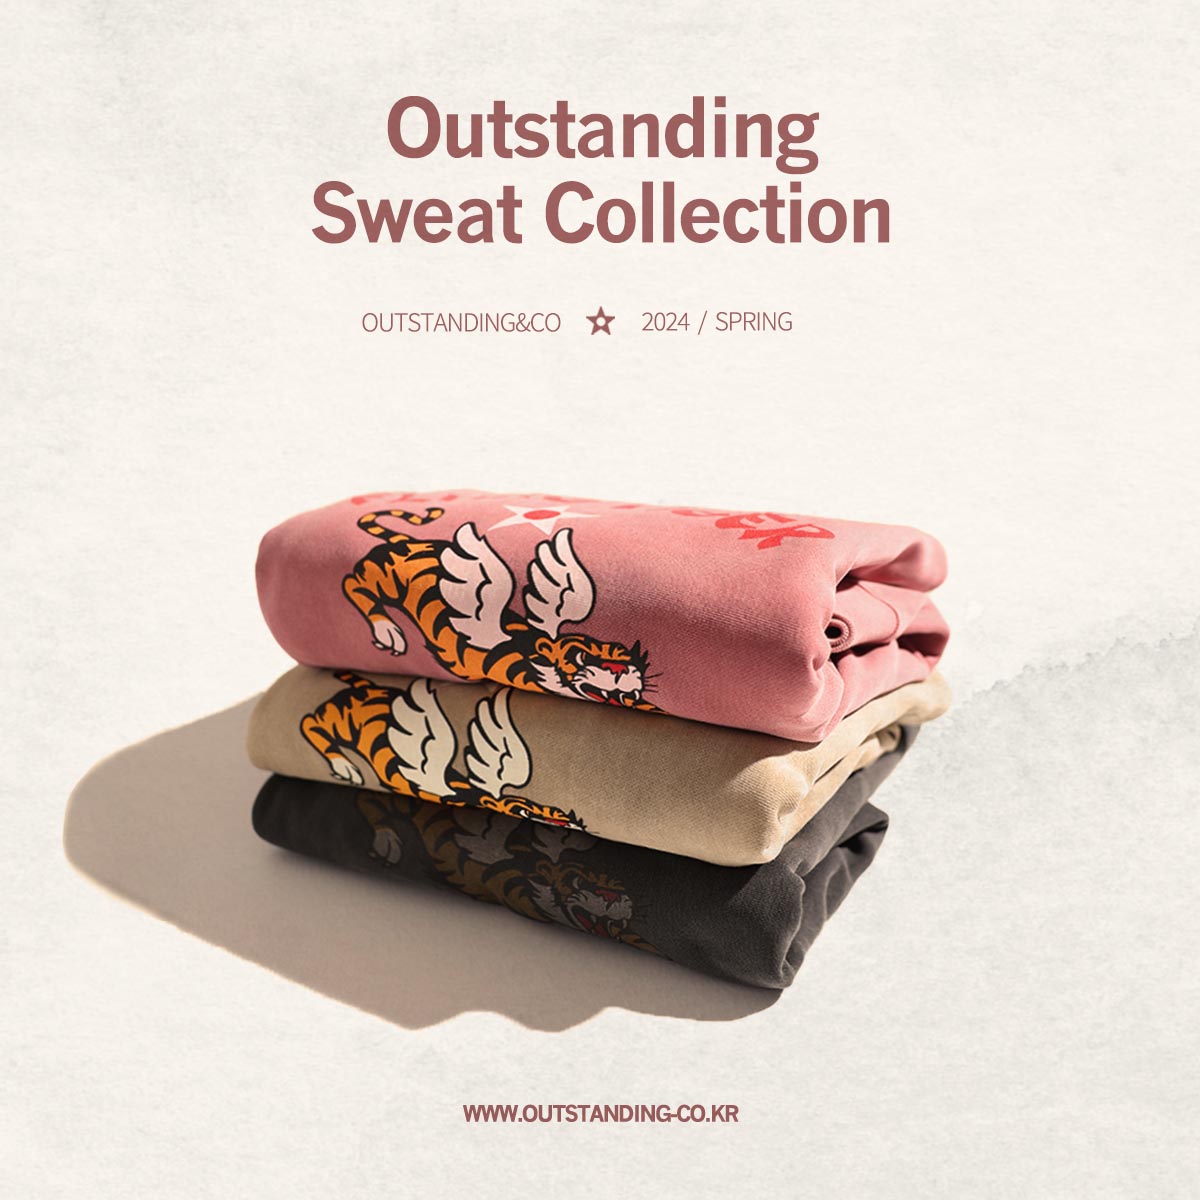 Outstanding Sweat Collection